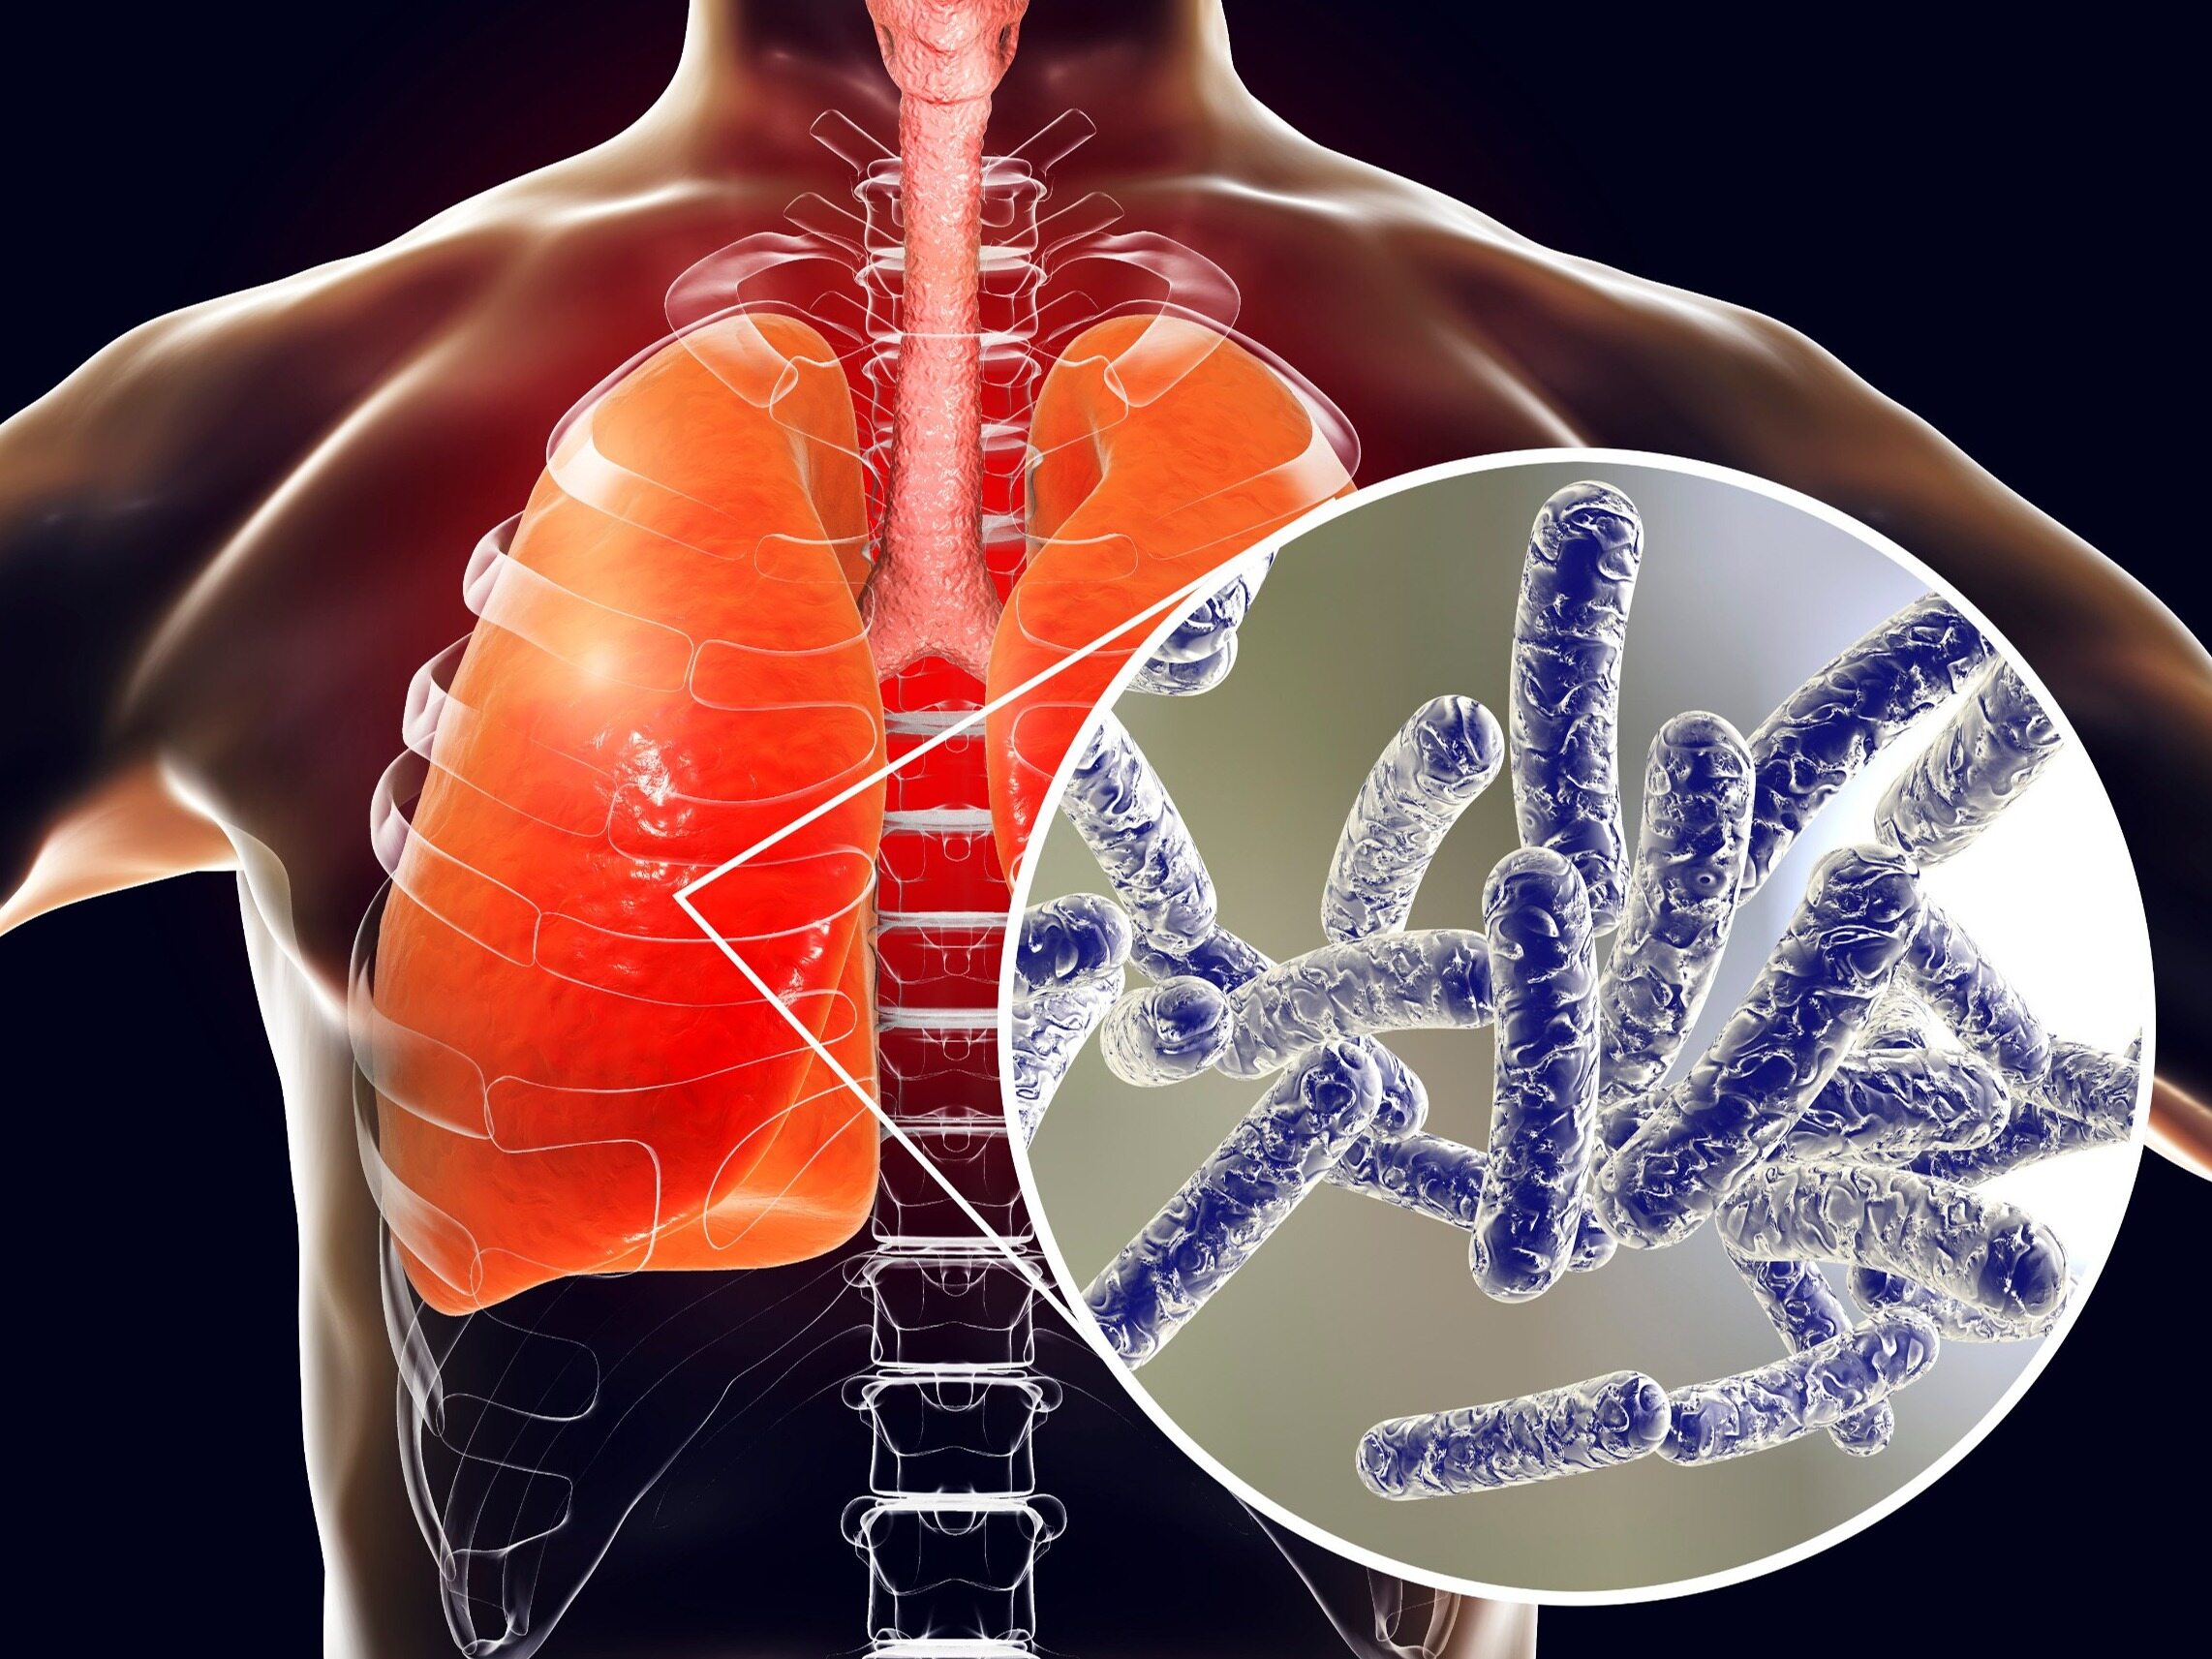 Legionnaires' disease - causes, route of infection, symptoms and treatment